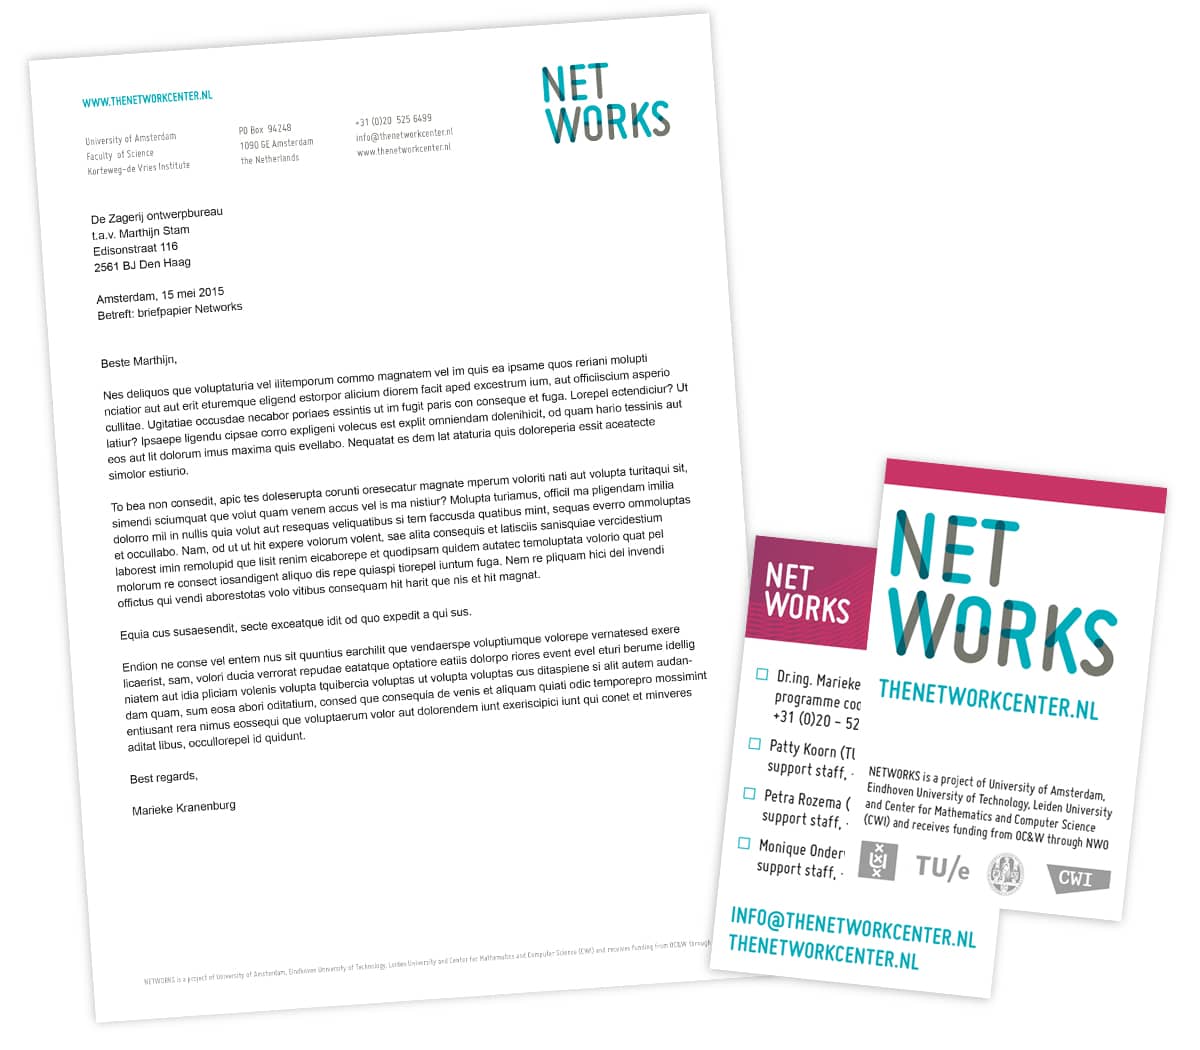 Networks stationary